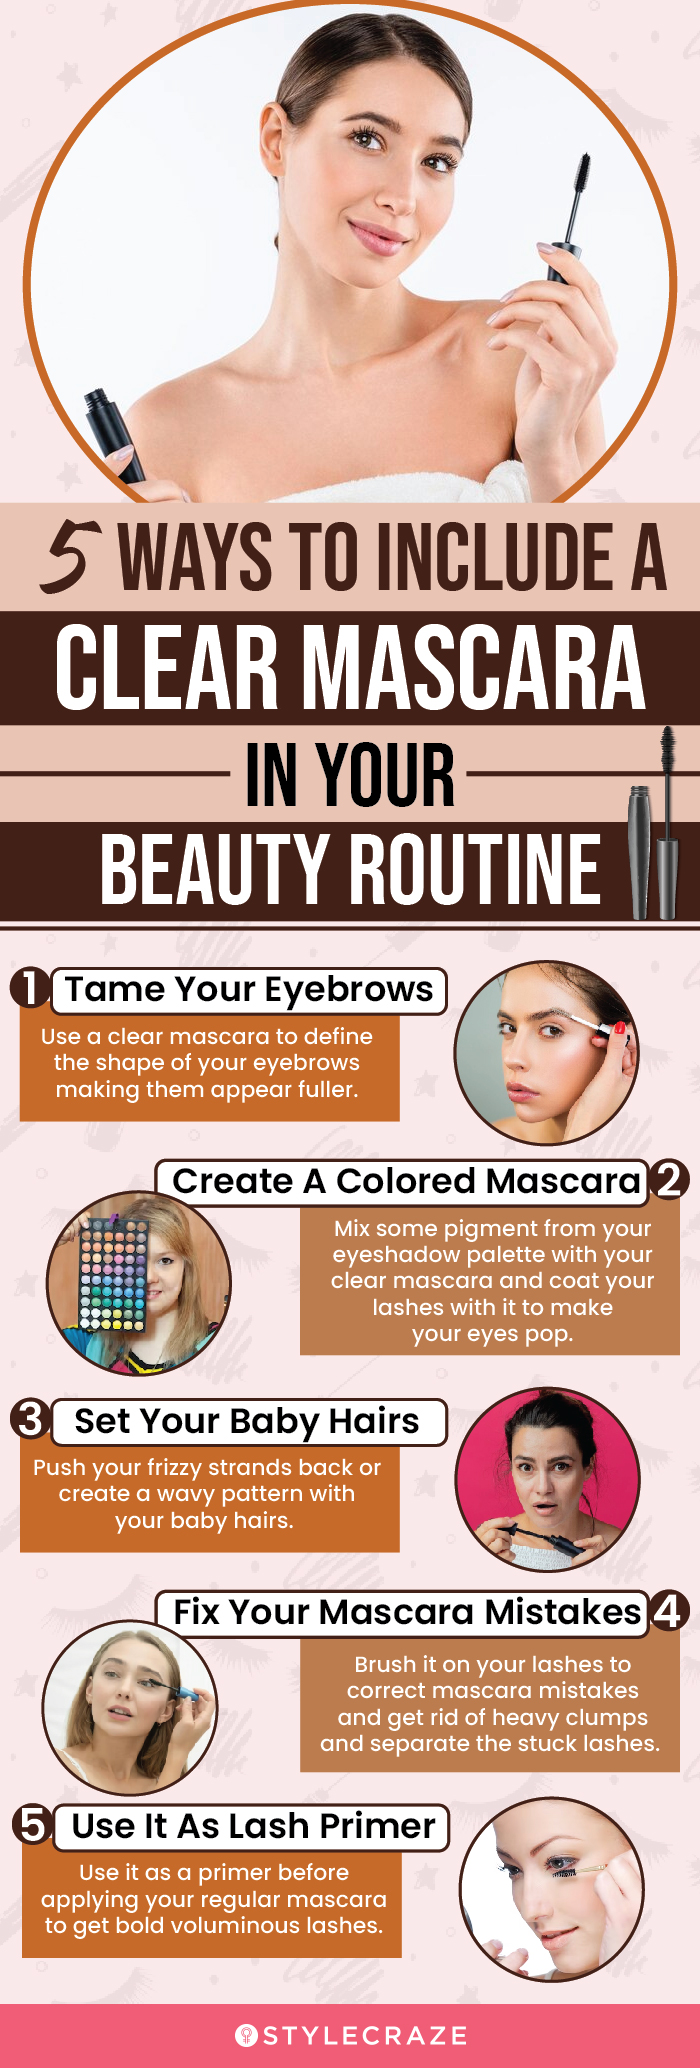 5 Ways To Include A Clear Mascara In Your Beauty Routine (infographic)